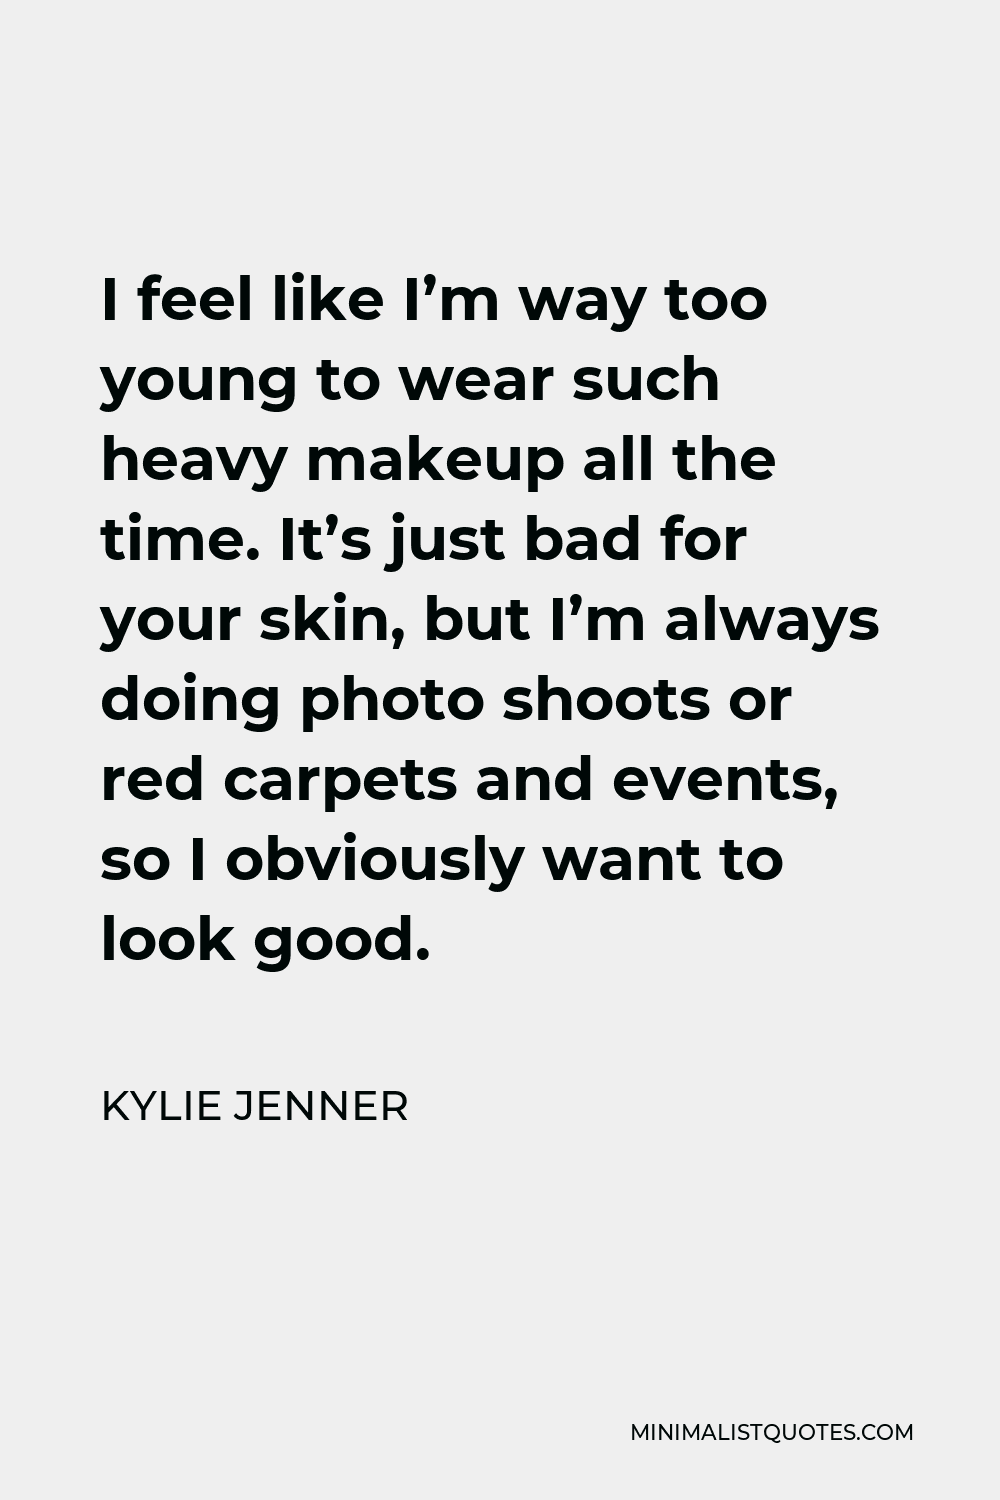 Kylie Jenner Quote - I feel like I’m way too young to wear such heavy makeup all the time. It’s just bad for your skin, but I’m always doing photo shoots or red carpets and events, so I obviously want to look good.